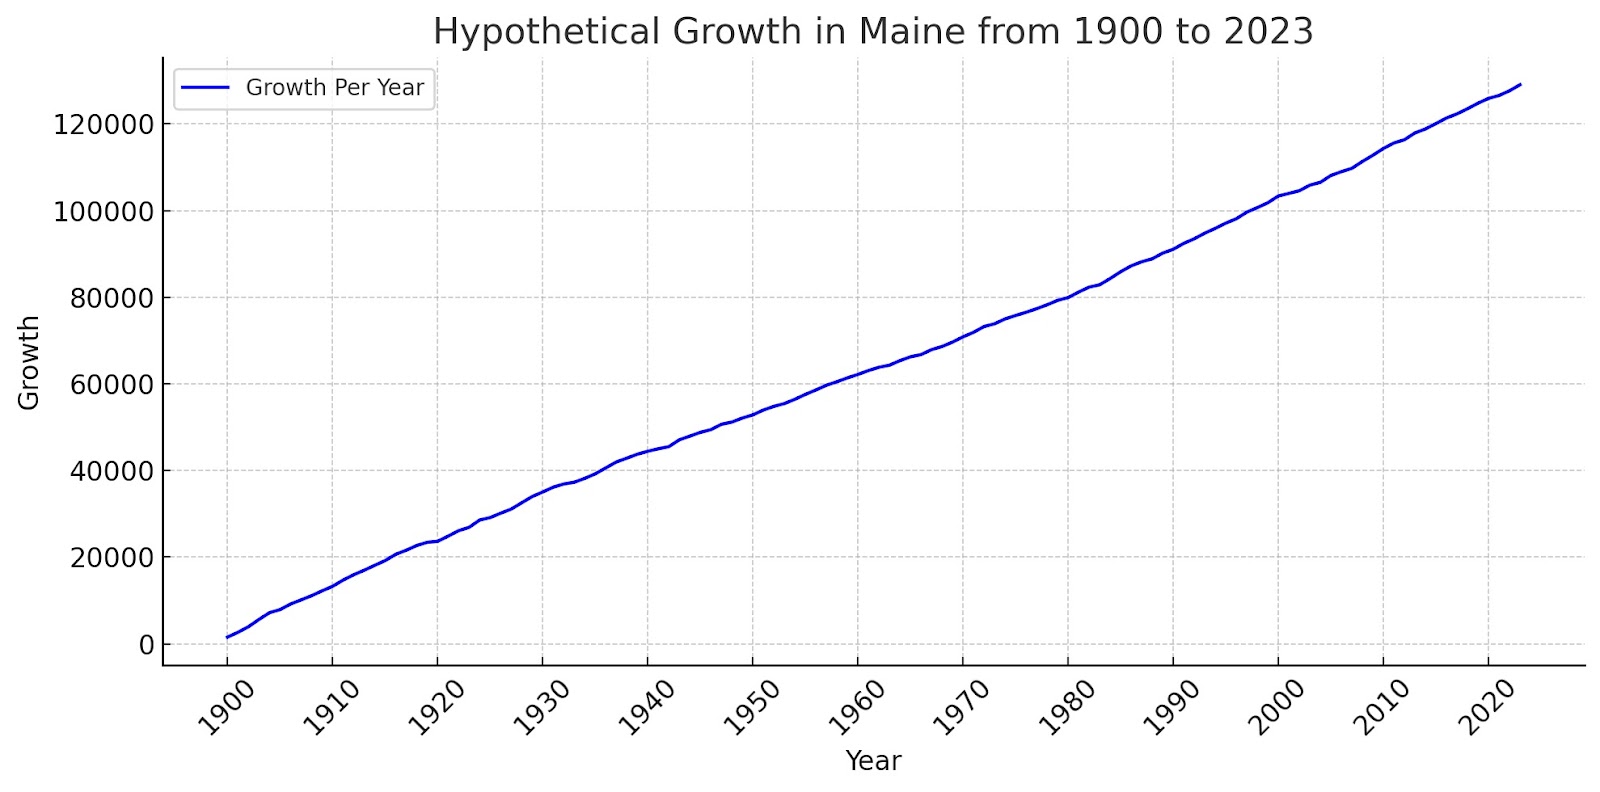 Maine growth per year from 1900 to 2023